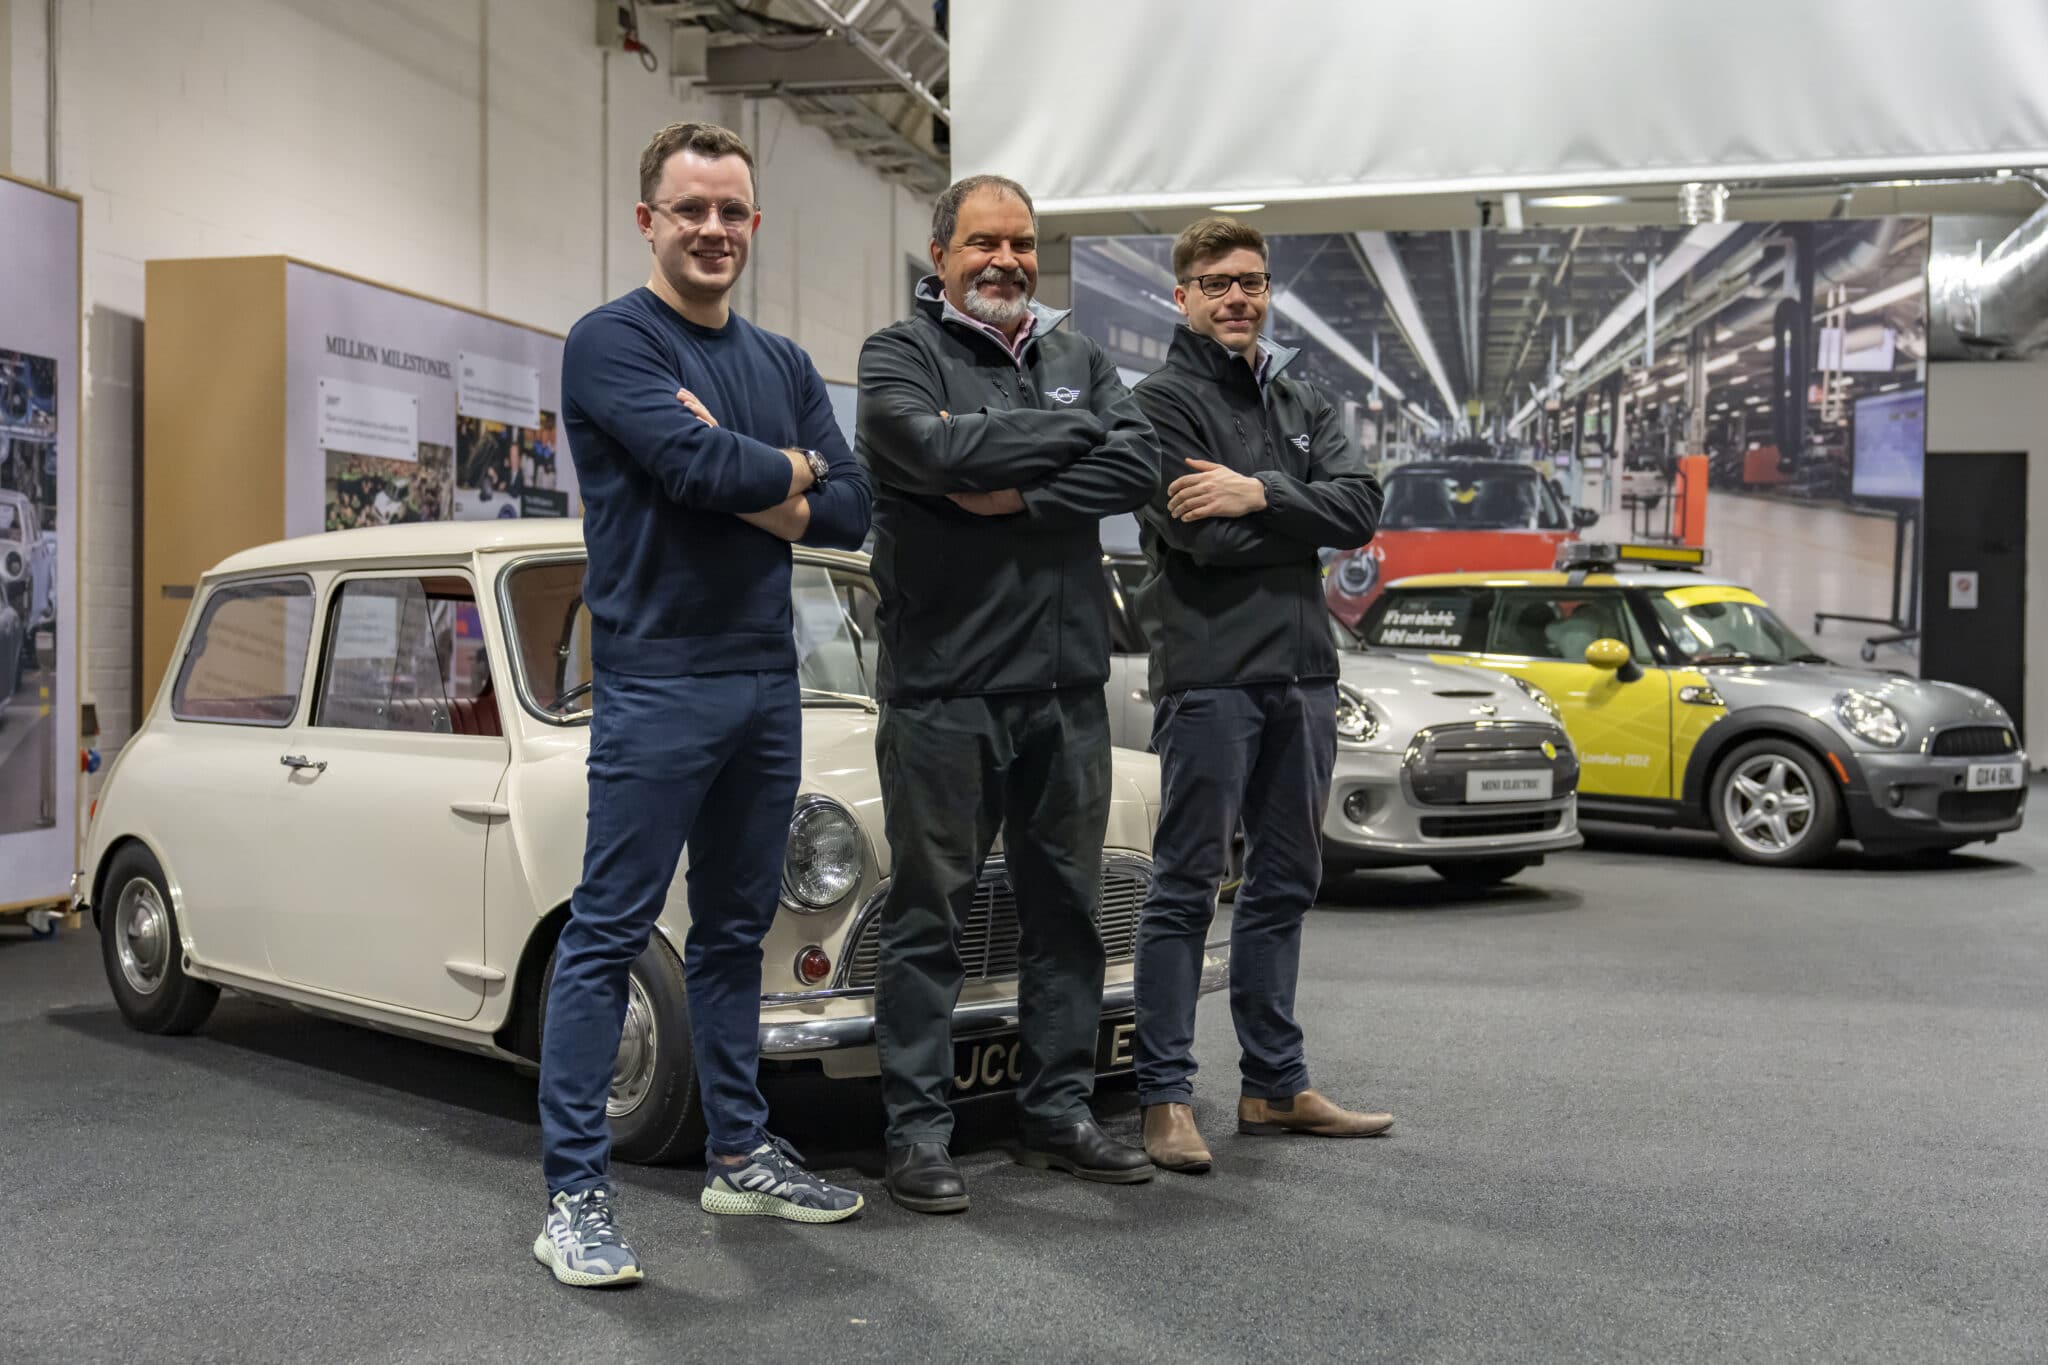 Recharged and electrifying: the classic Mini launches into the future